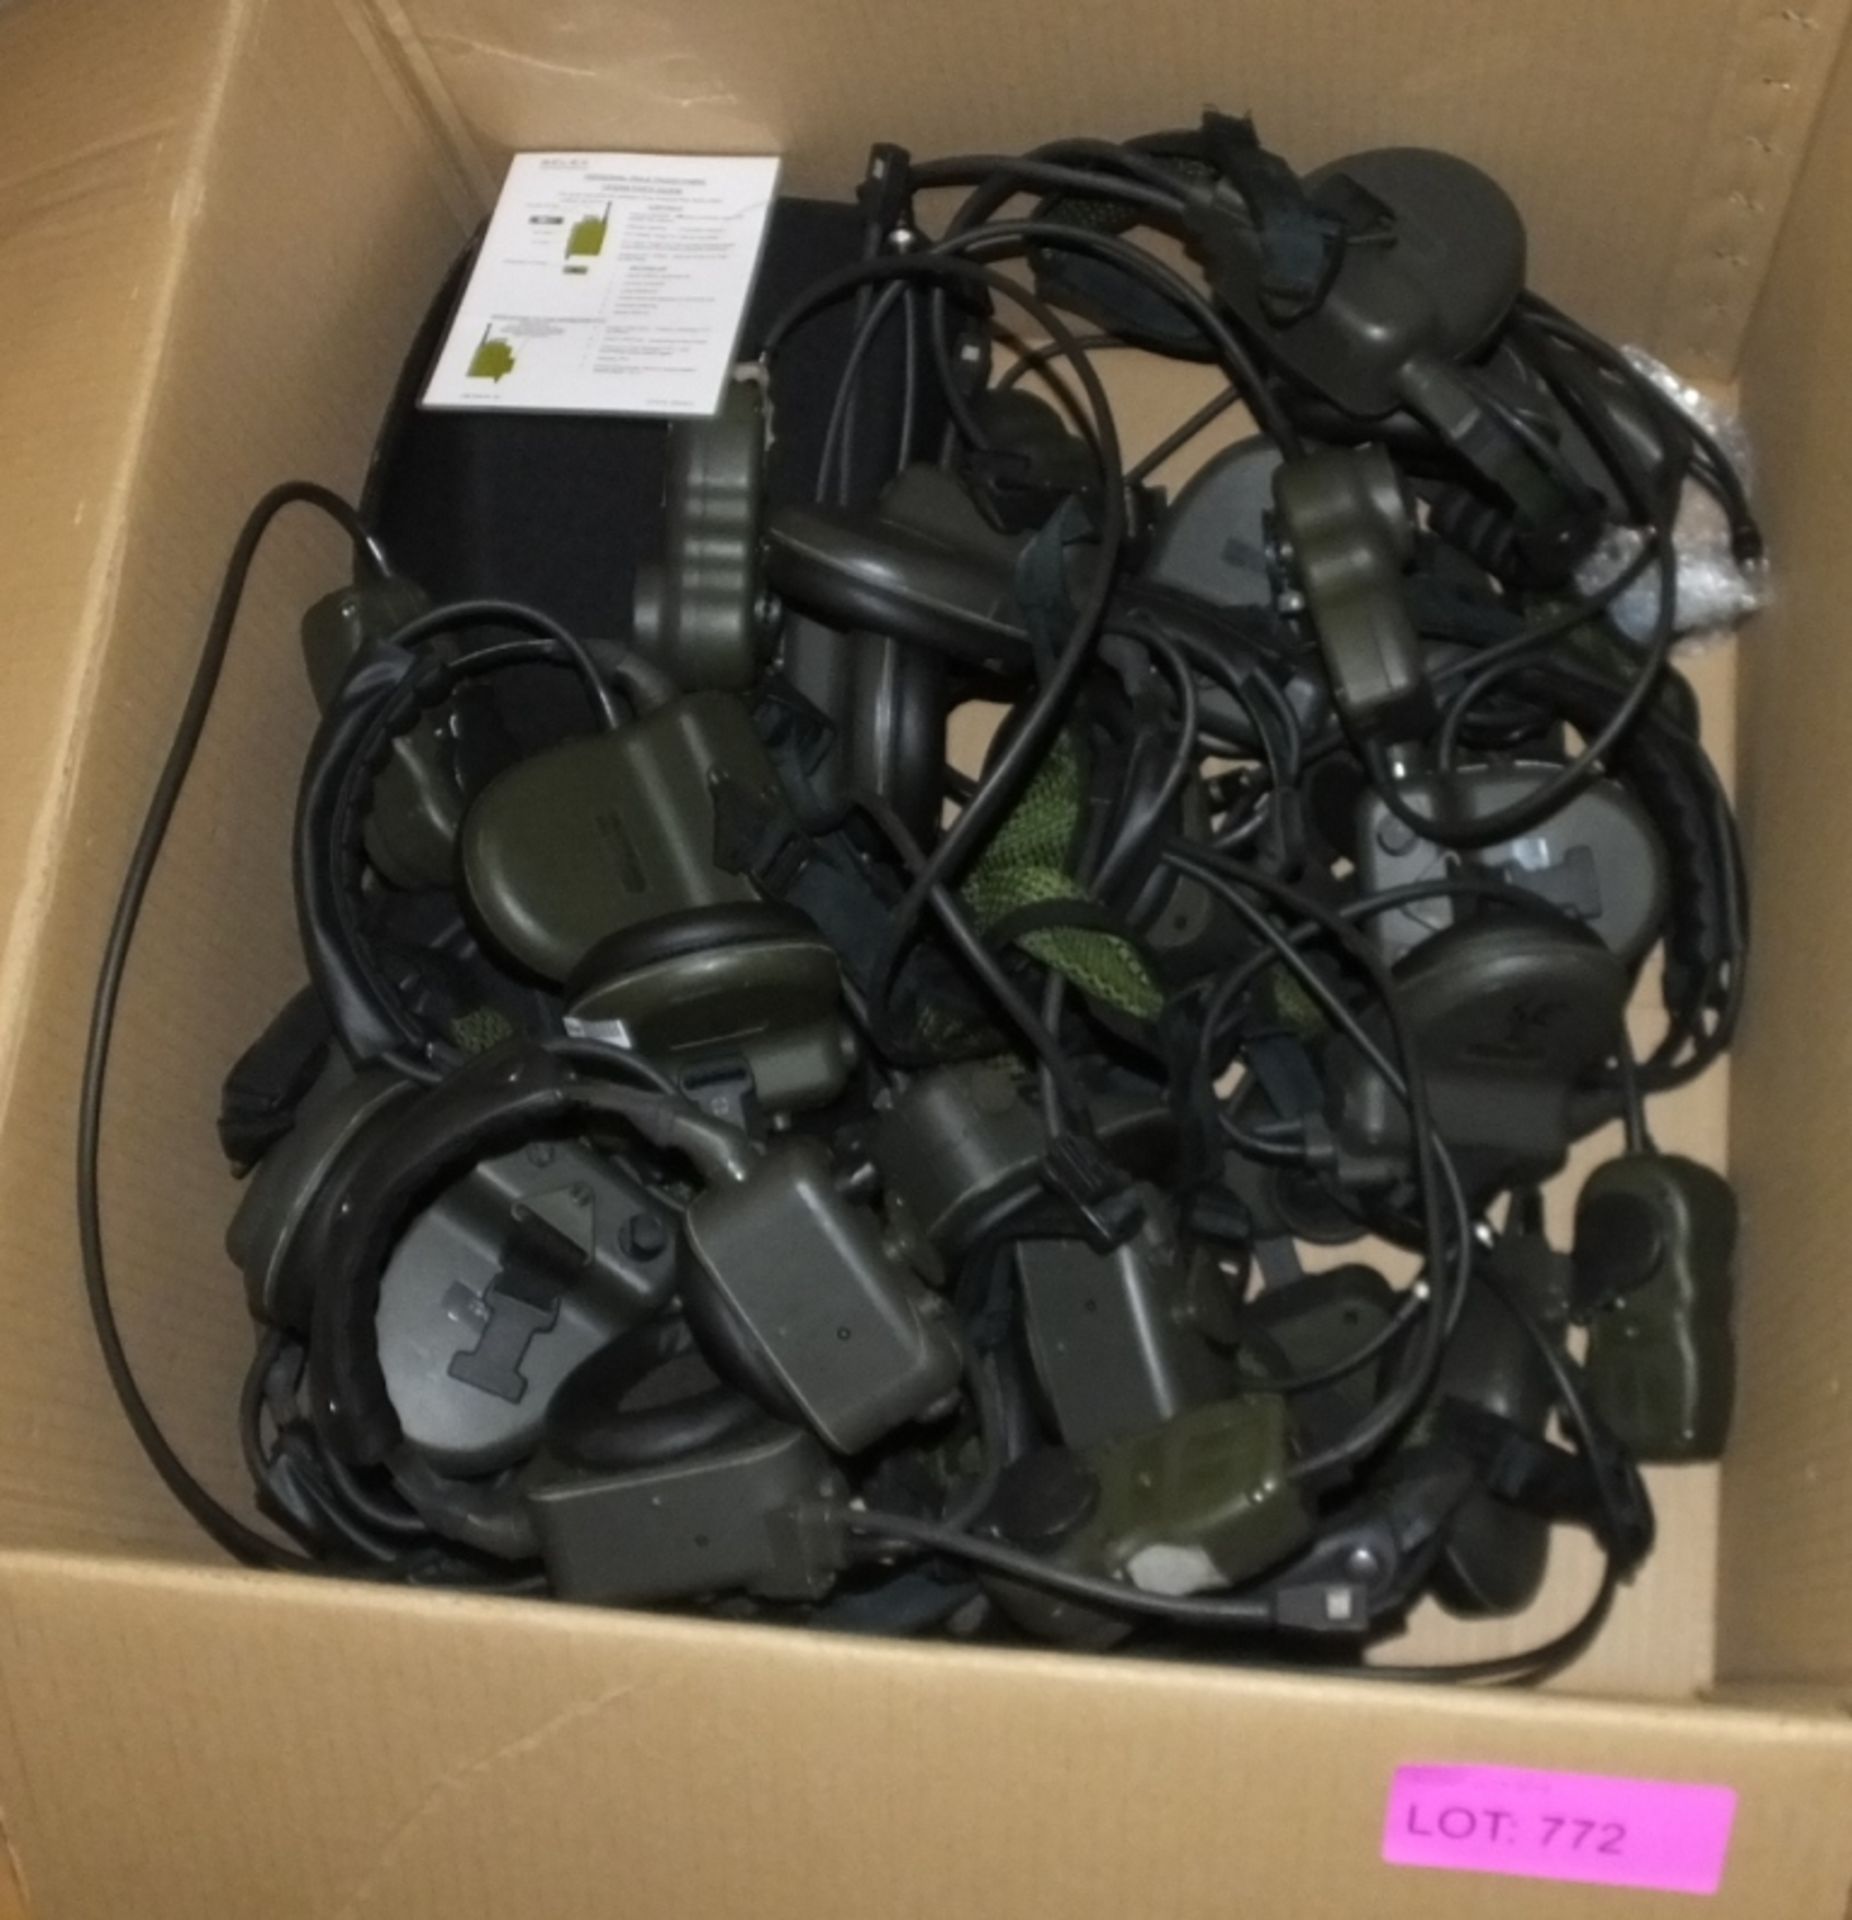 12x Selex Personal Role Radio H4855 Headsets